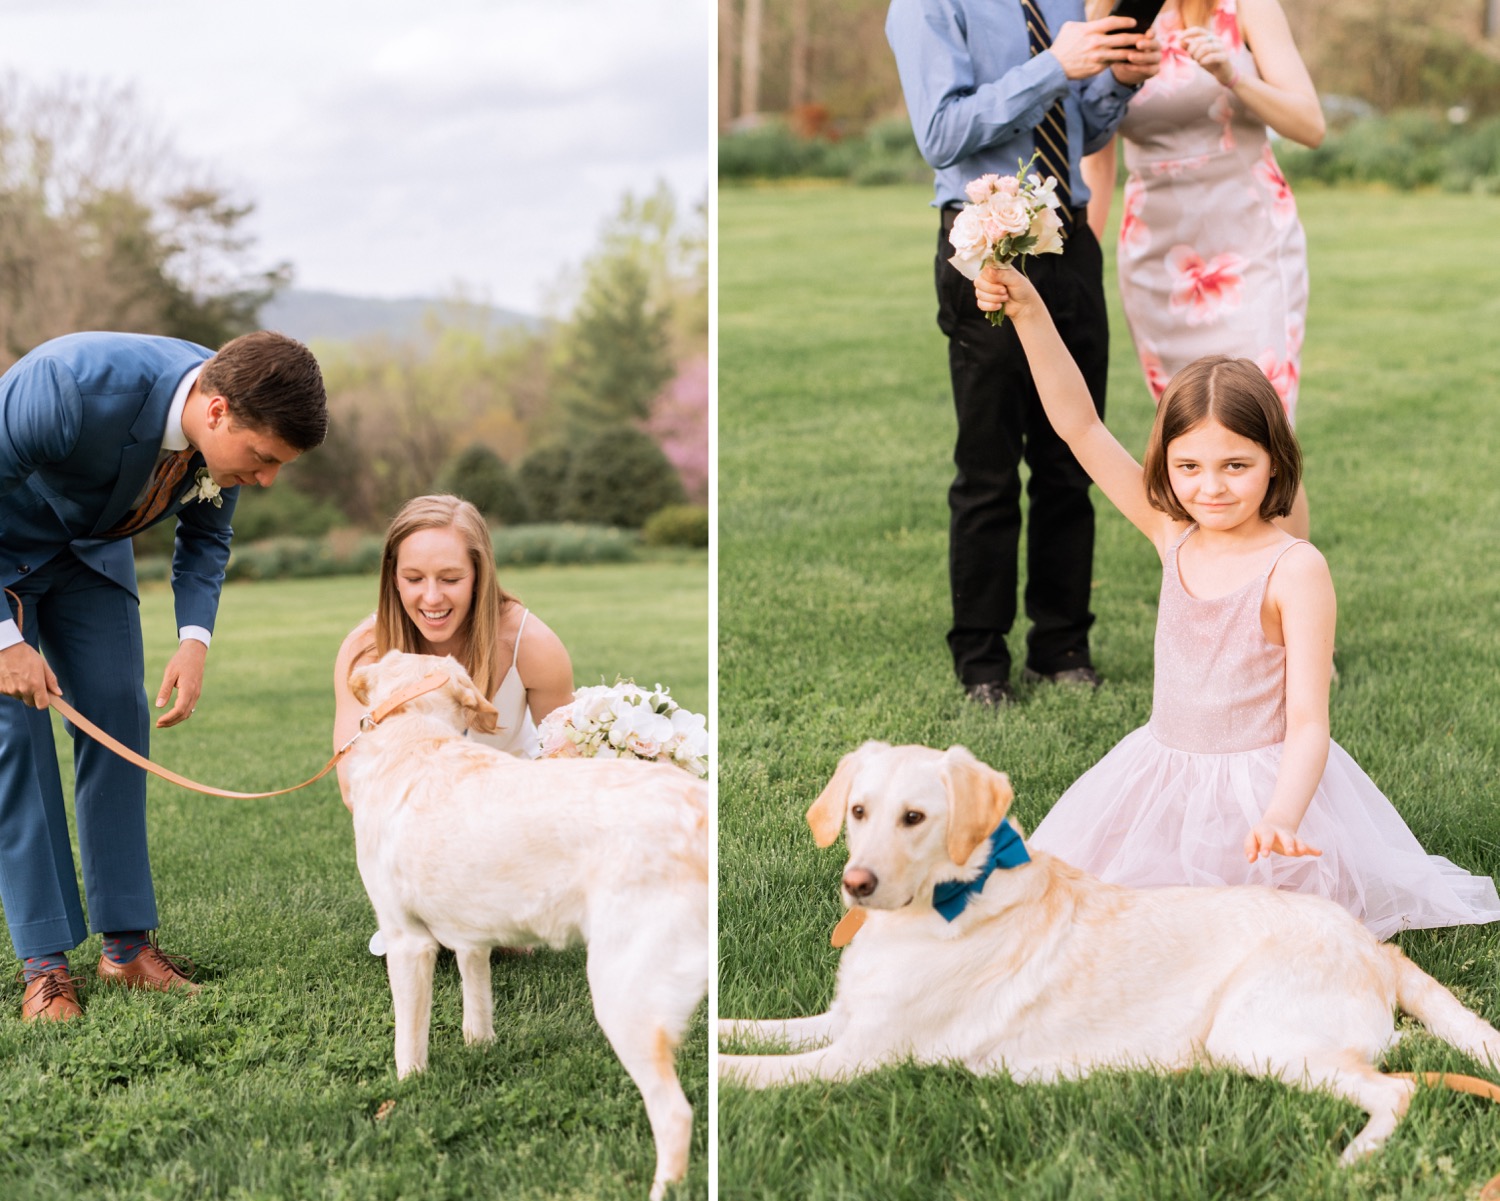 bride groom and flowergirl celebrate their wedding day with the family dog